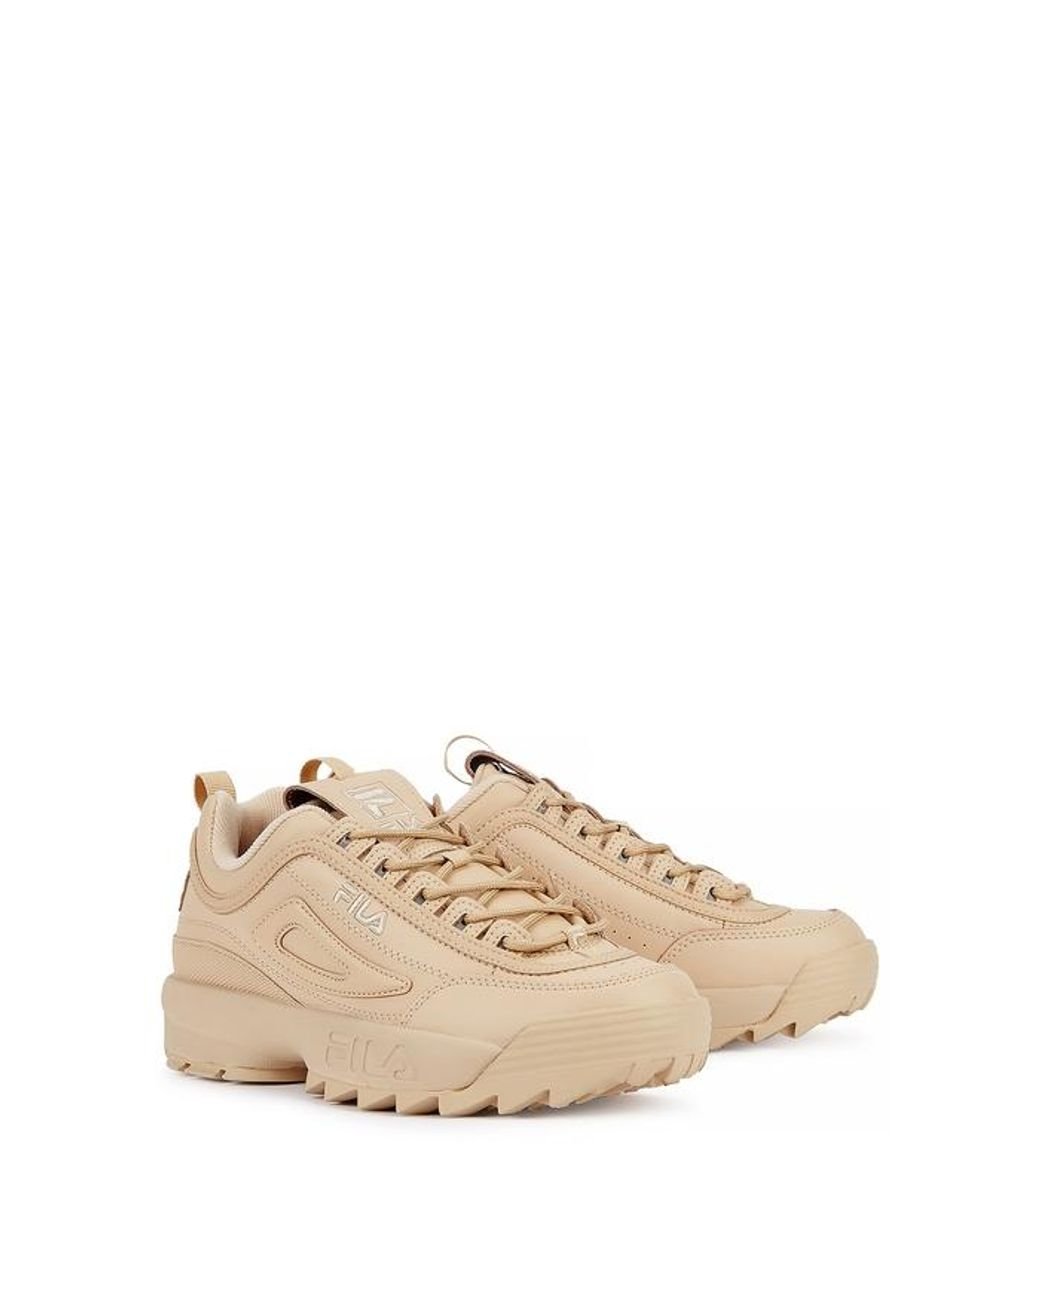 Fila Disruptor Ii Autumn Sand Leather Sneakers in Natural | Lyst